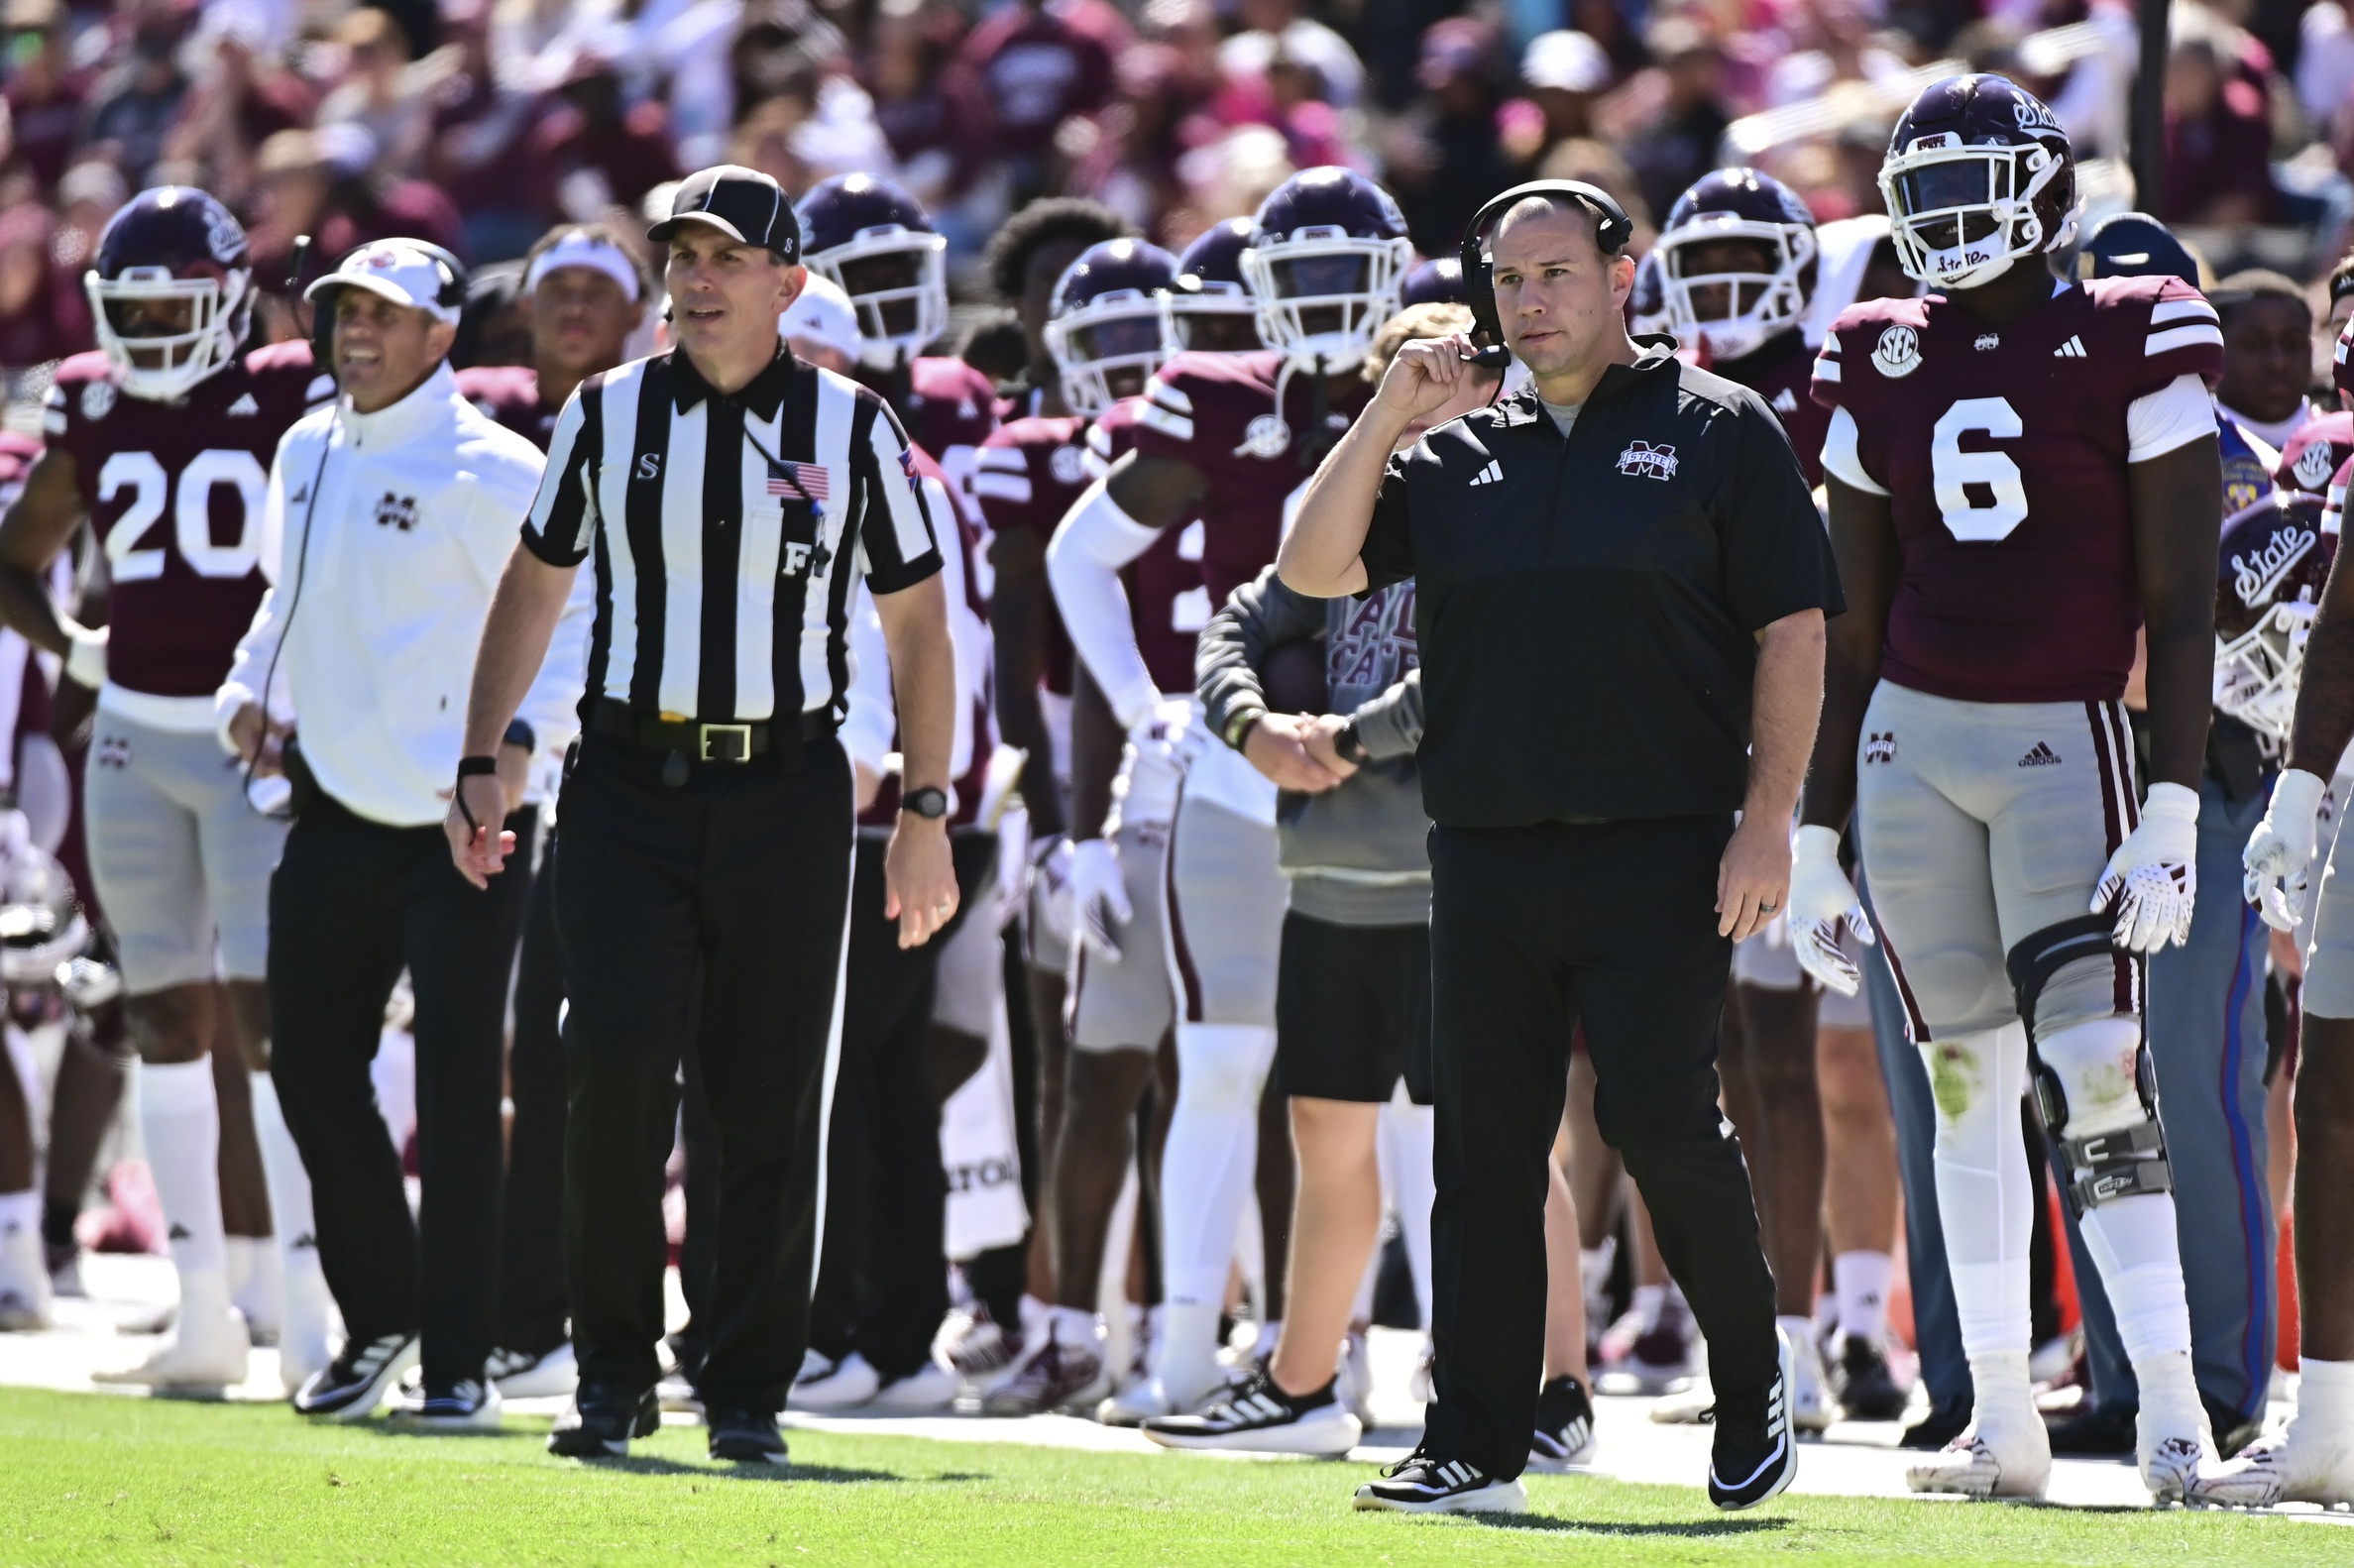 Mississippi State travels to Fayetteville, AR Saturday. The Bulldogs regroup against the Razorbacks of Arkansas following a bye week.